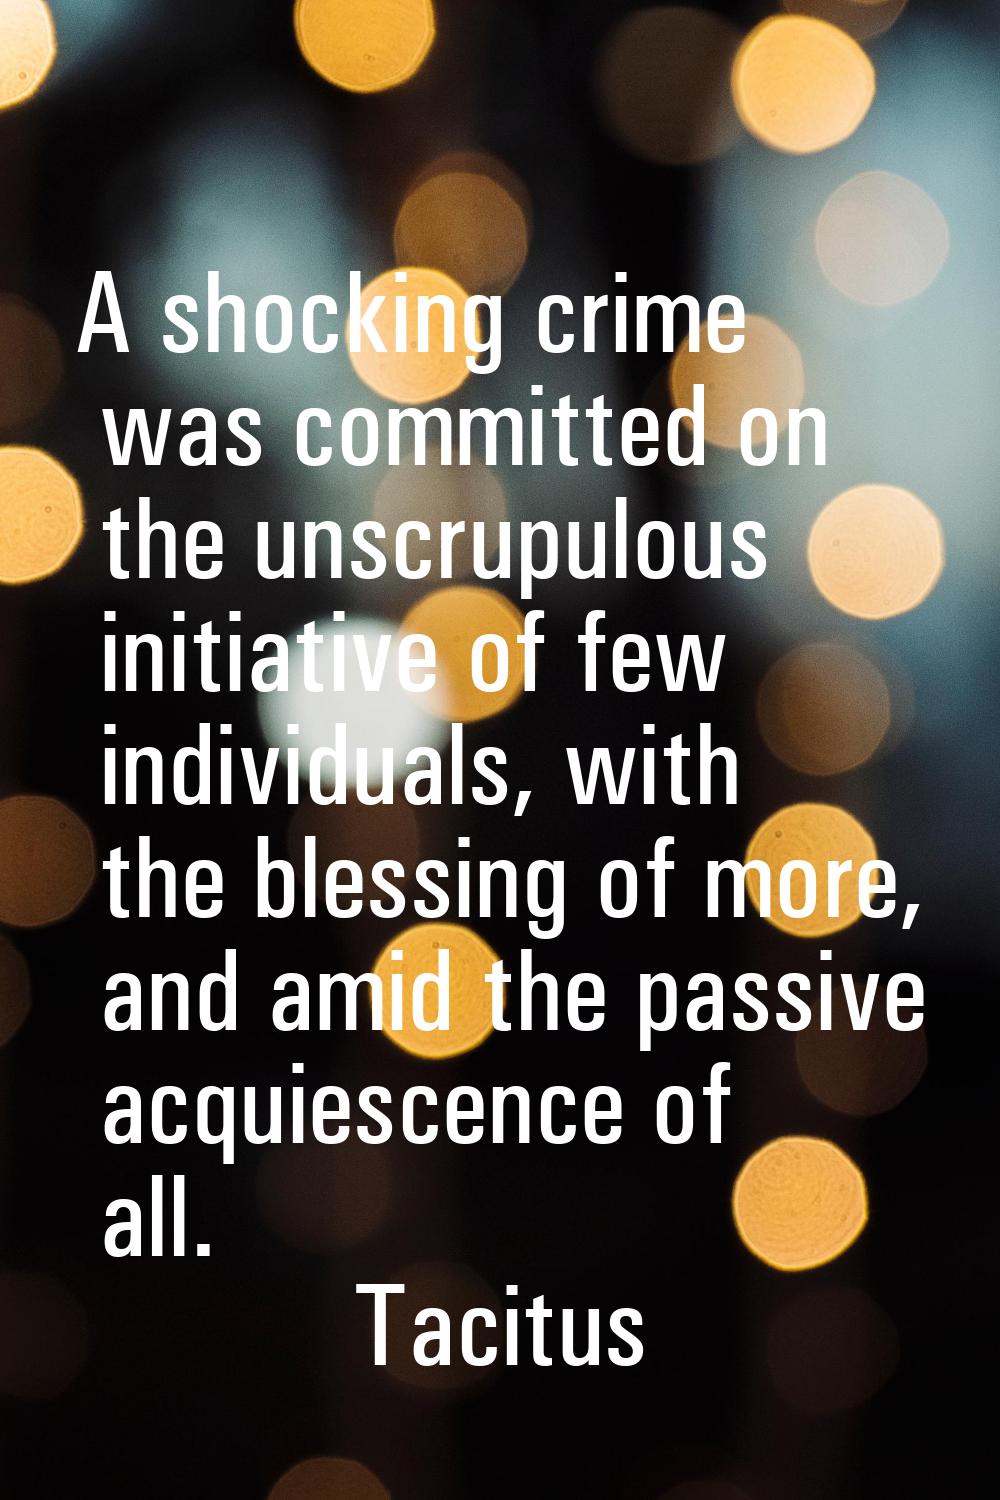 A shocking crime was committed on the unscrupulous initiative of few individuals, with the blessing